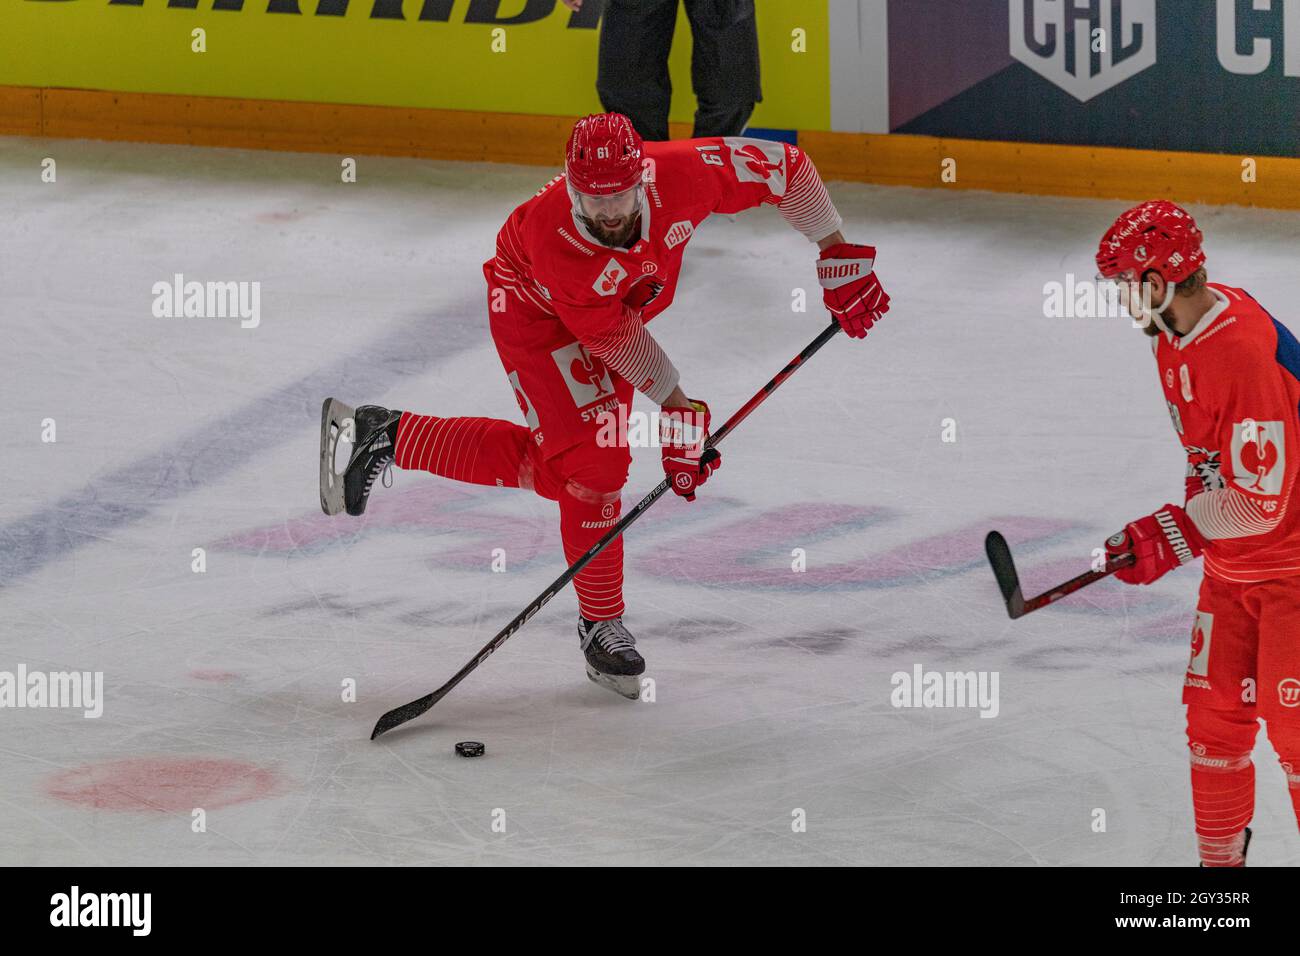 Lausanne, Switzerland. 10th June, 2021. Fabian Heldner of Lausanne Hc is in  action during the 5th day (Group C) of the Champions Hockey League  2021-2022 with the Fc Lausanne Sport and Adler